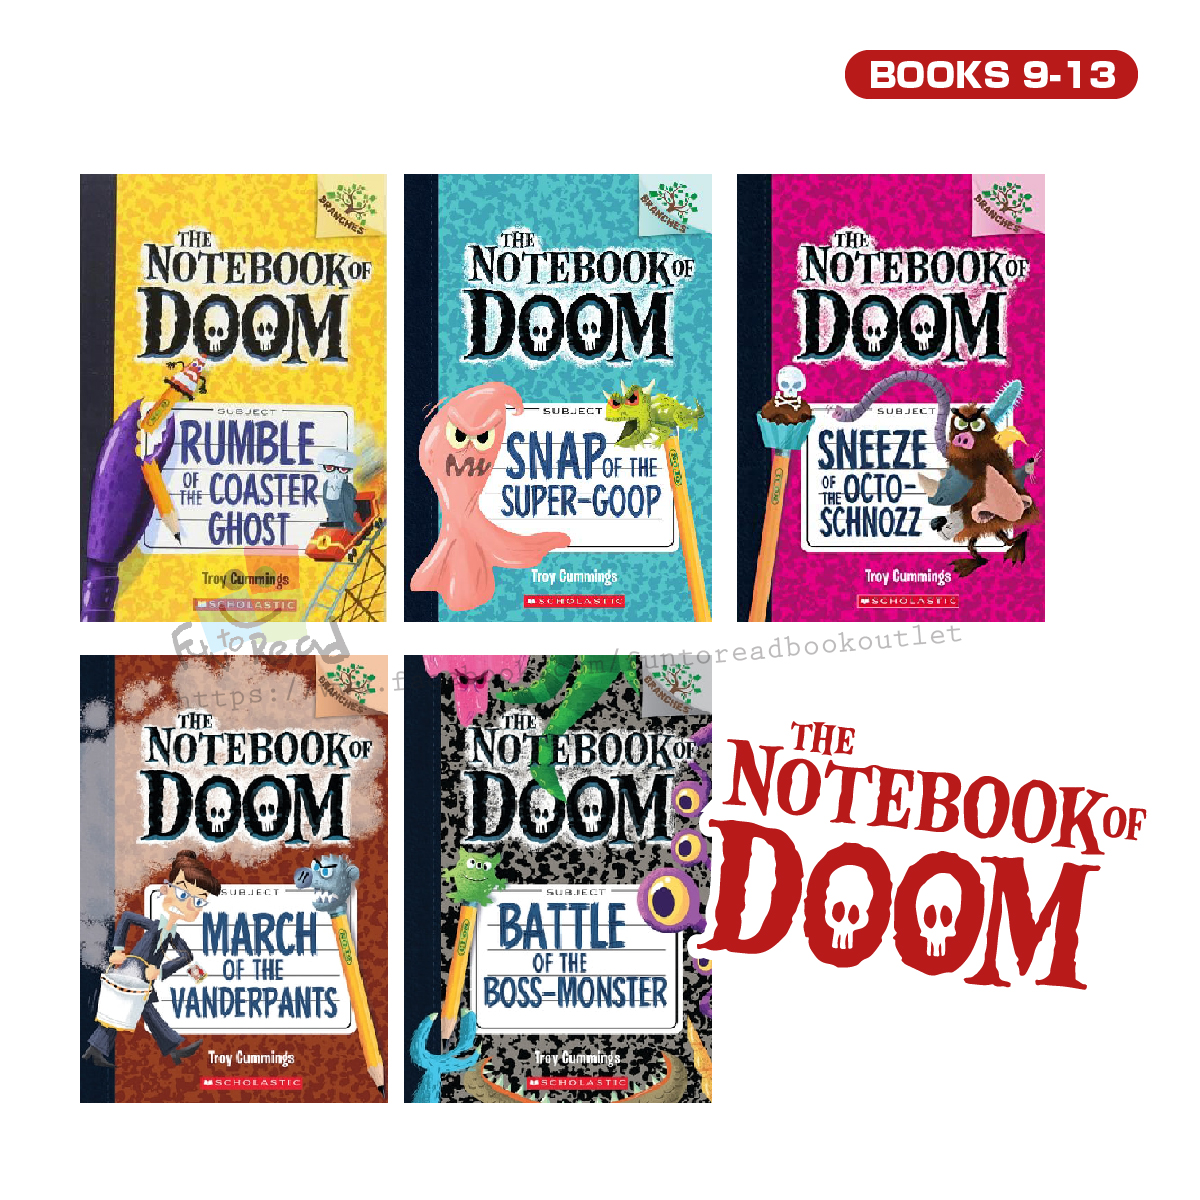 The Notebook of Doom Book 9-13 - Fun To Read Book Outlet 英文兒童 